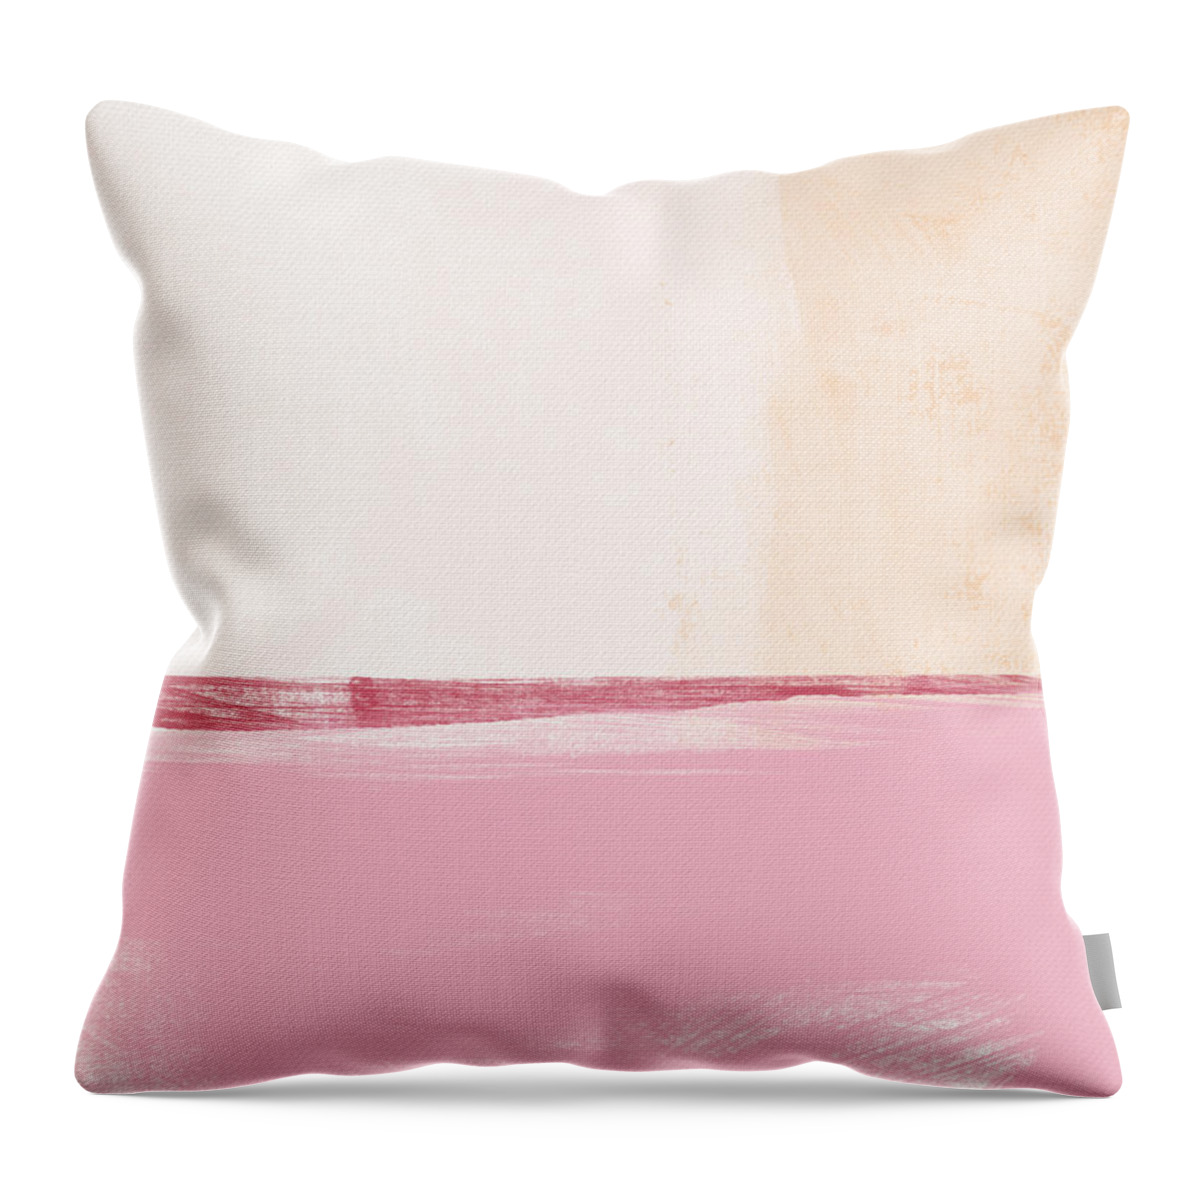 Abstract Landscape Throw Pillow featuring the painting Pastel Landscape by Linda Woods